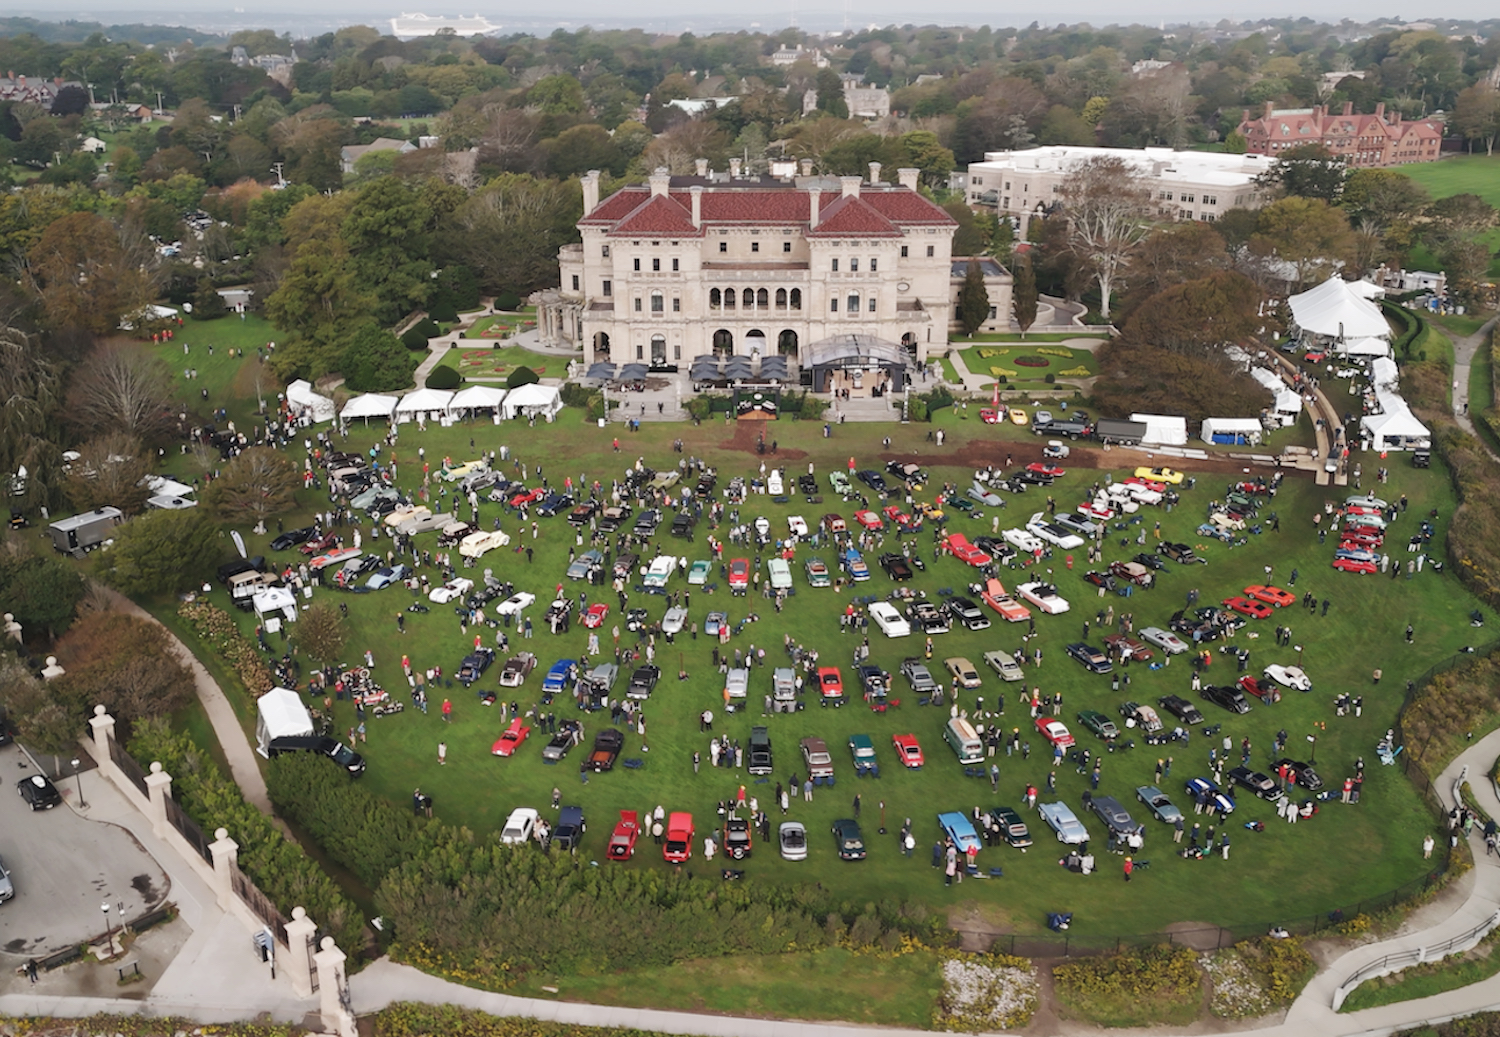 Aerial view of Audrain Newport Concours d'Elegance